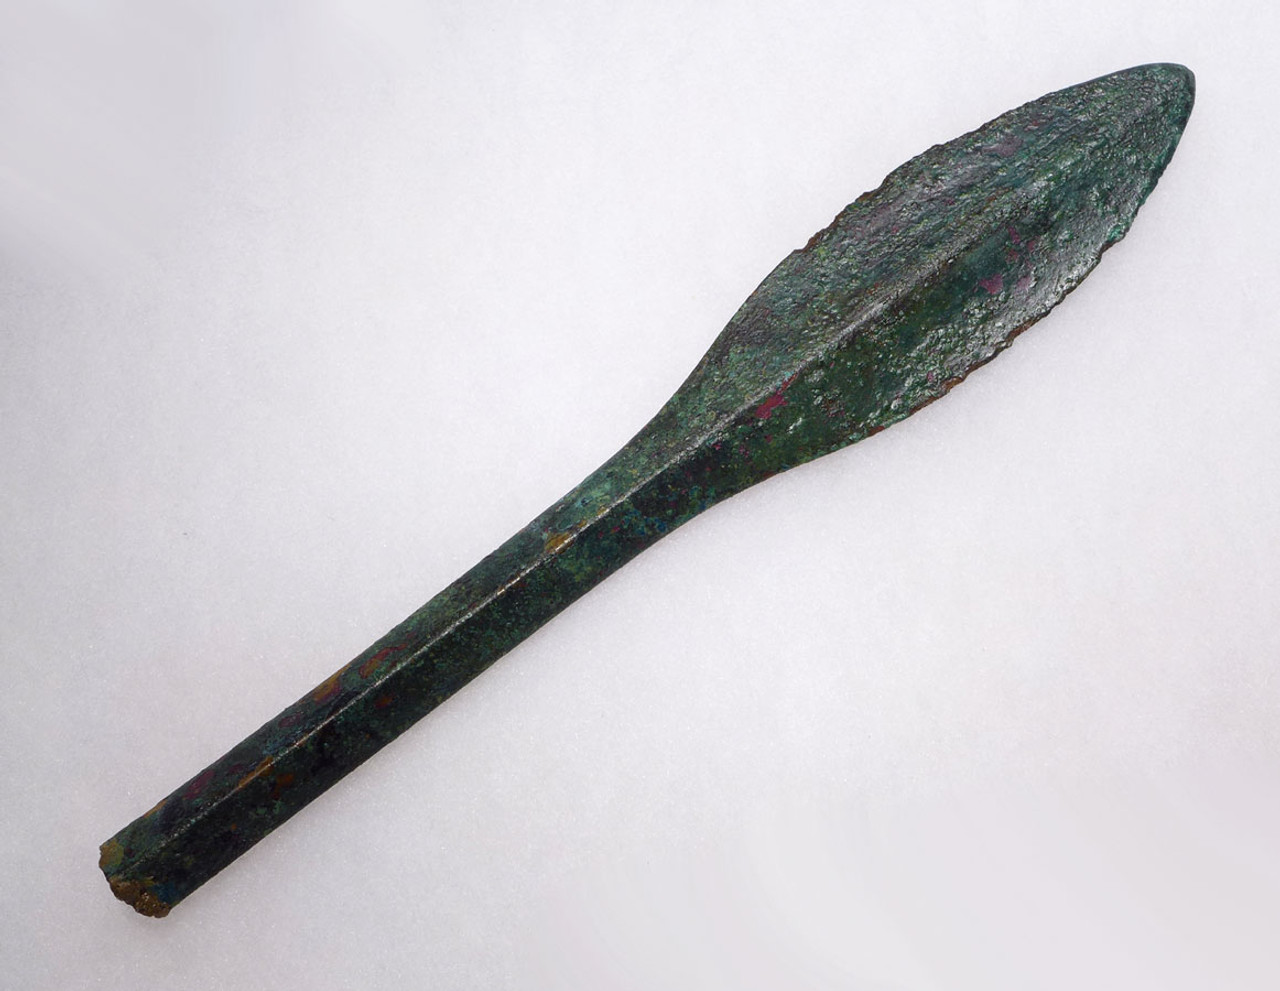 LARGE ANCIENT BRONZE ARTILLERY JAVELIN BOLT SPEARHEAD FROM THE NEAR EAST  *LUR159